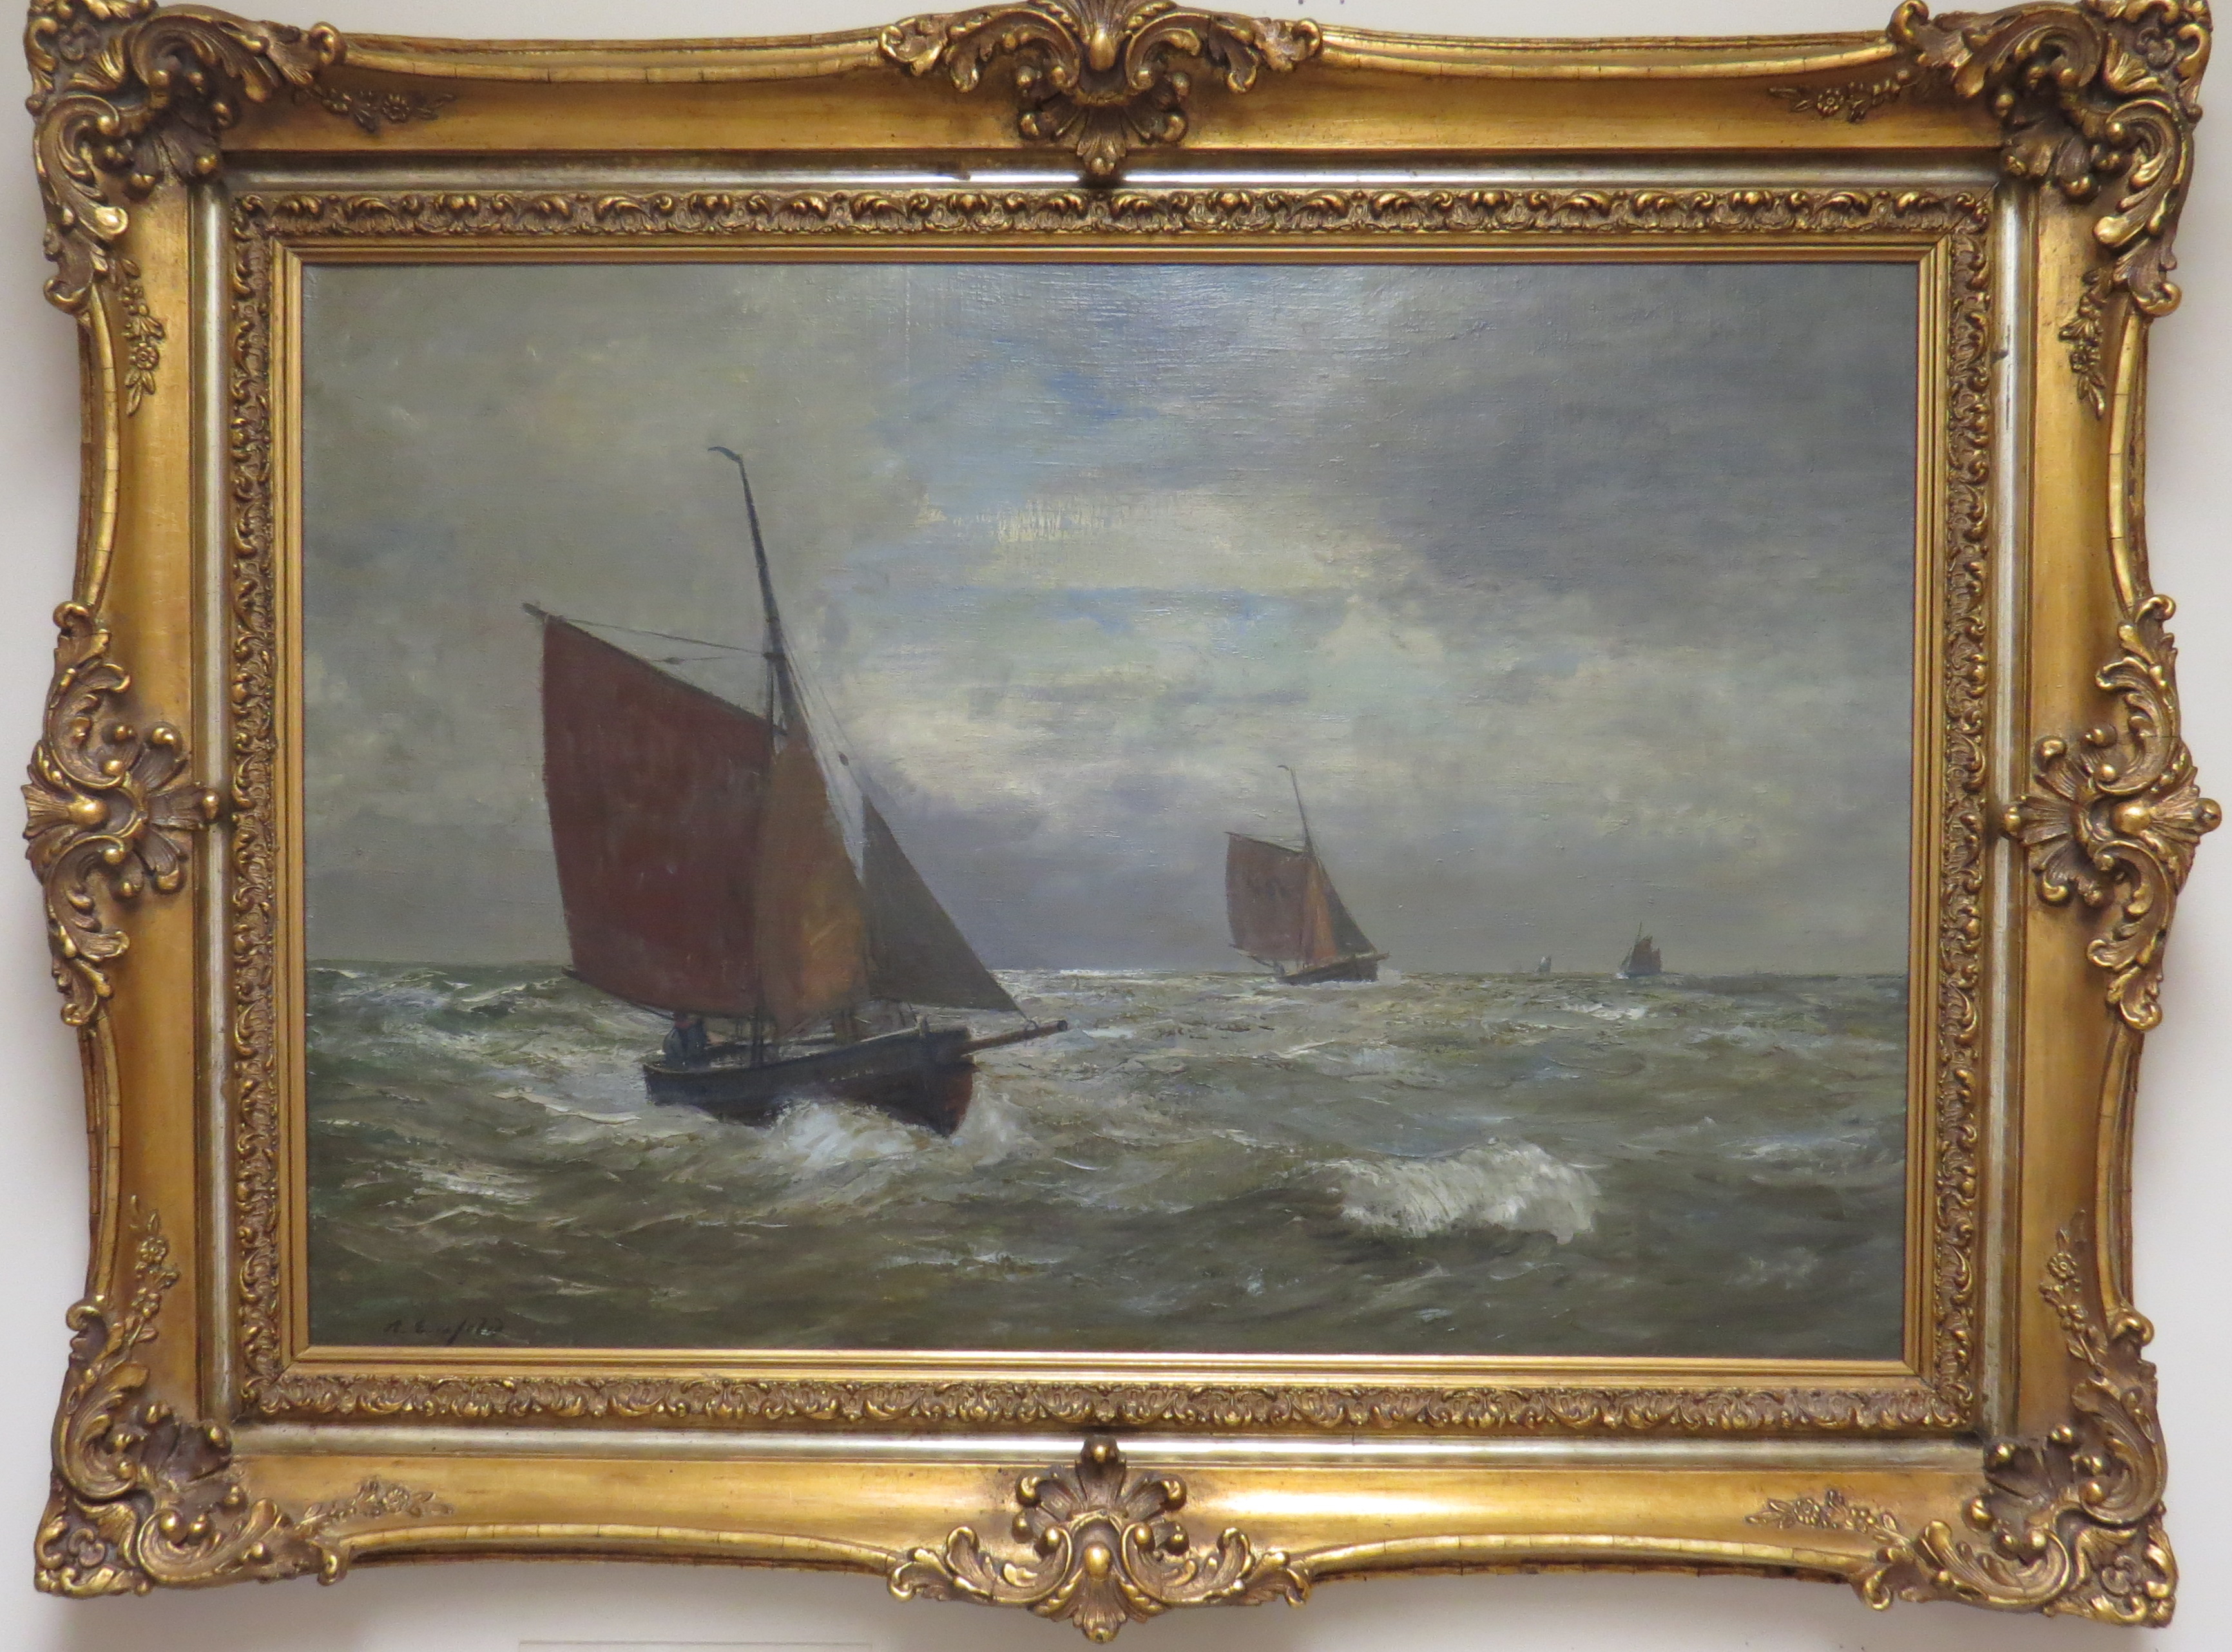 Oil on Canvas of “Sailboats on Rough Waters” signed Alexander Essfeld (German, 1879-1939)